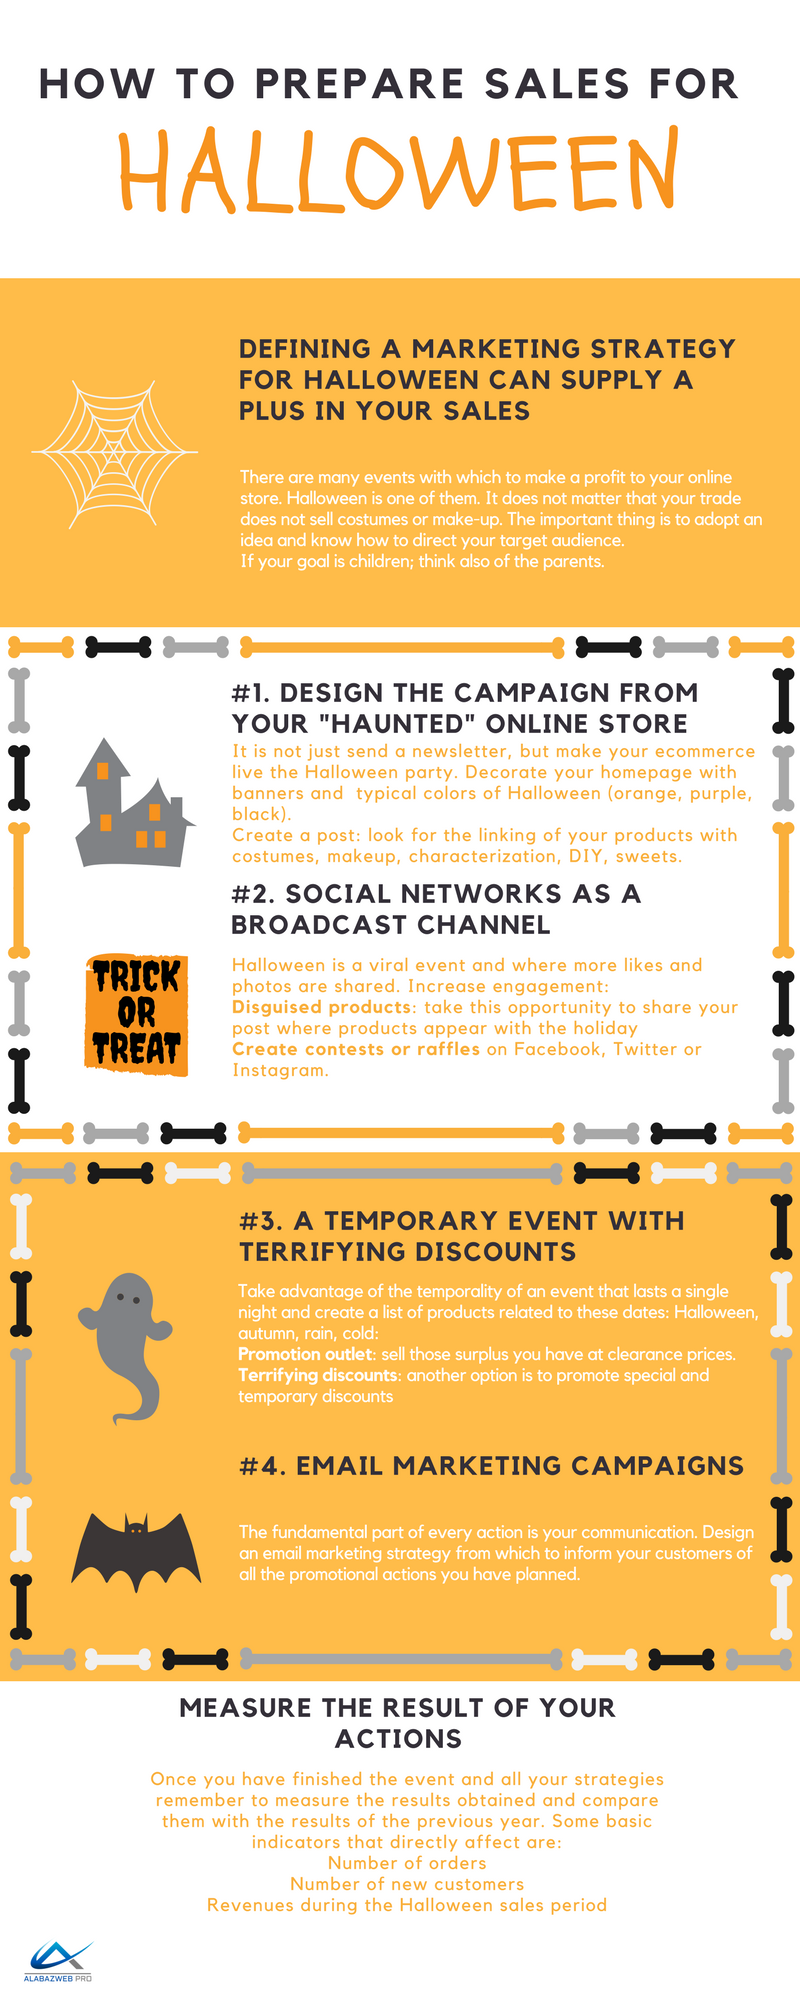 Increase your revenues on Halloween with theese tips. An very smart infographic